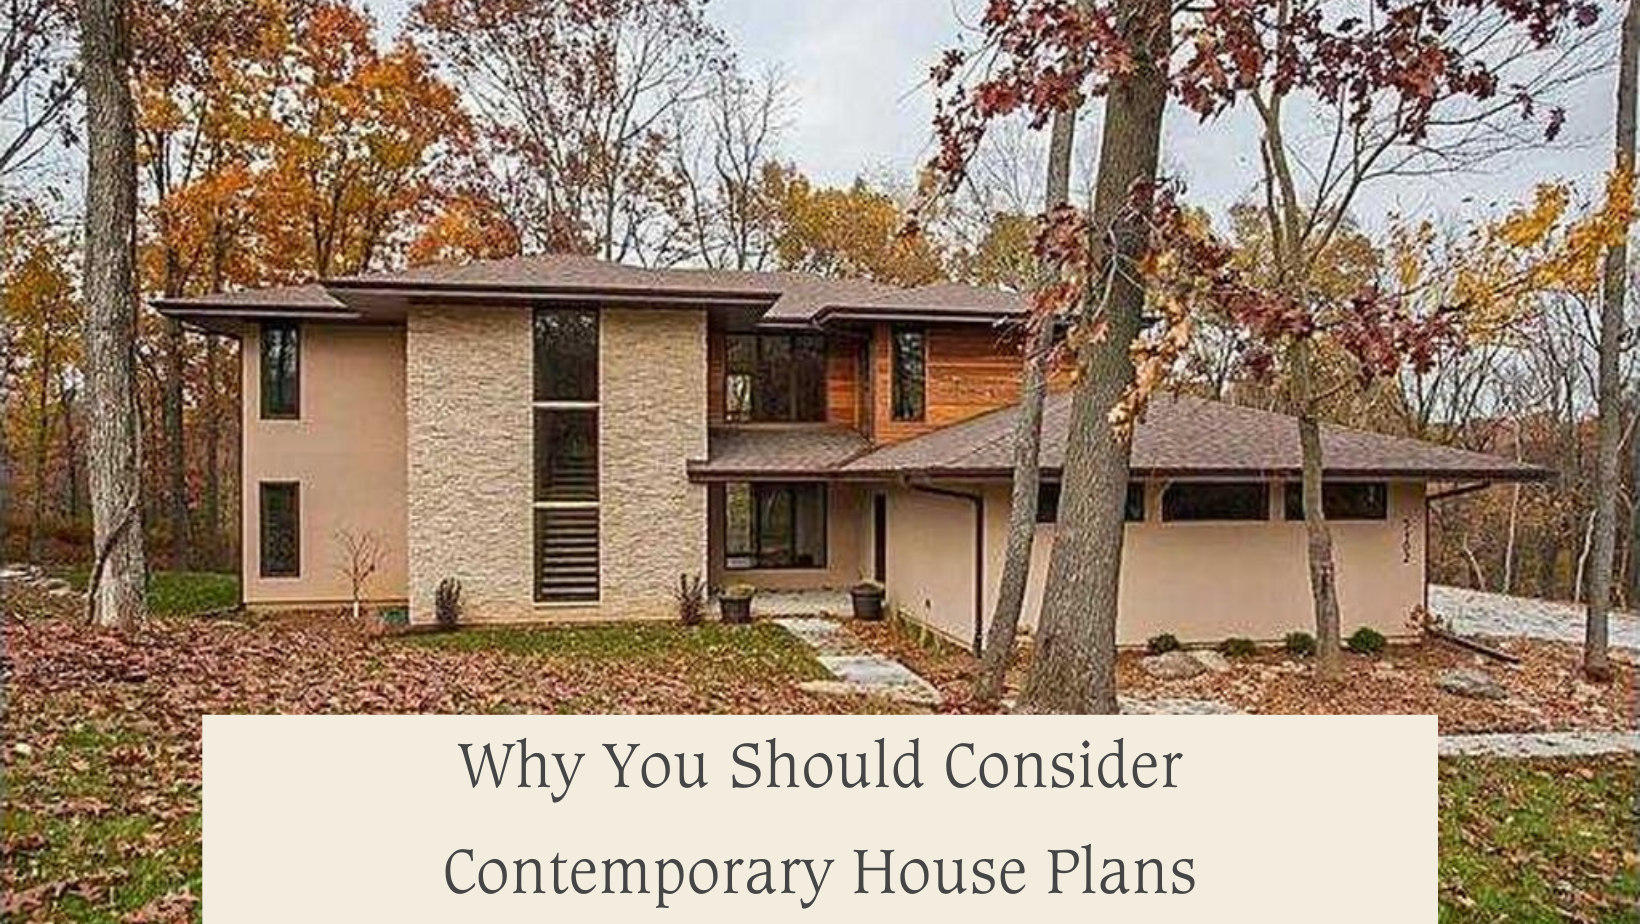 Why You Should Consider Contemporary House Plans